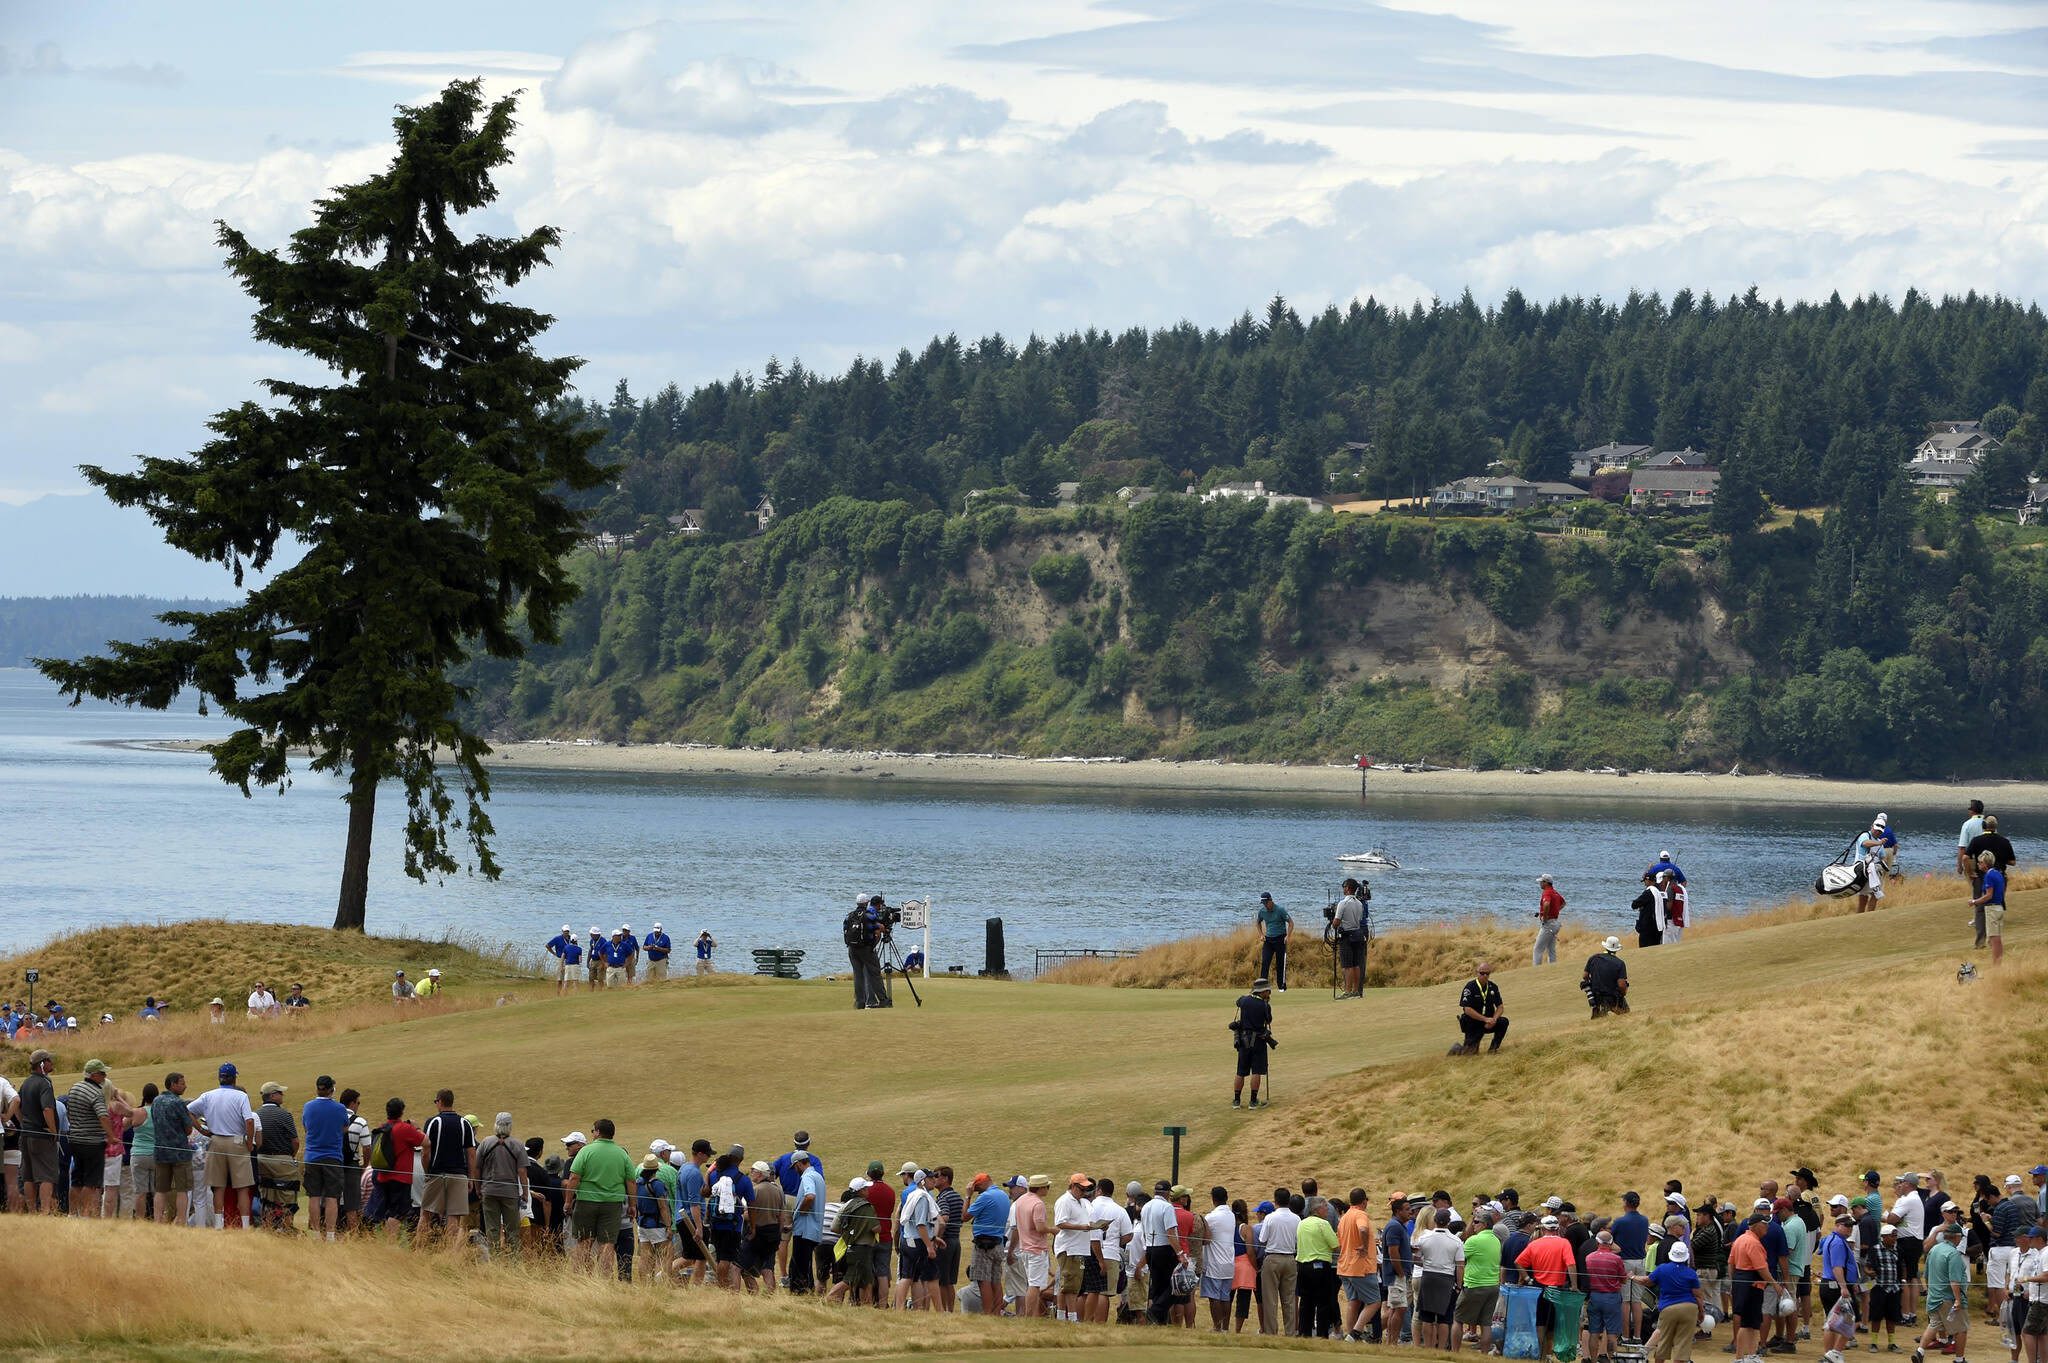 With no U.S. Open in sight at Chambers, Pierce County ponders Saudi-backed LIV Golf | HeraldNet.com